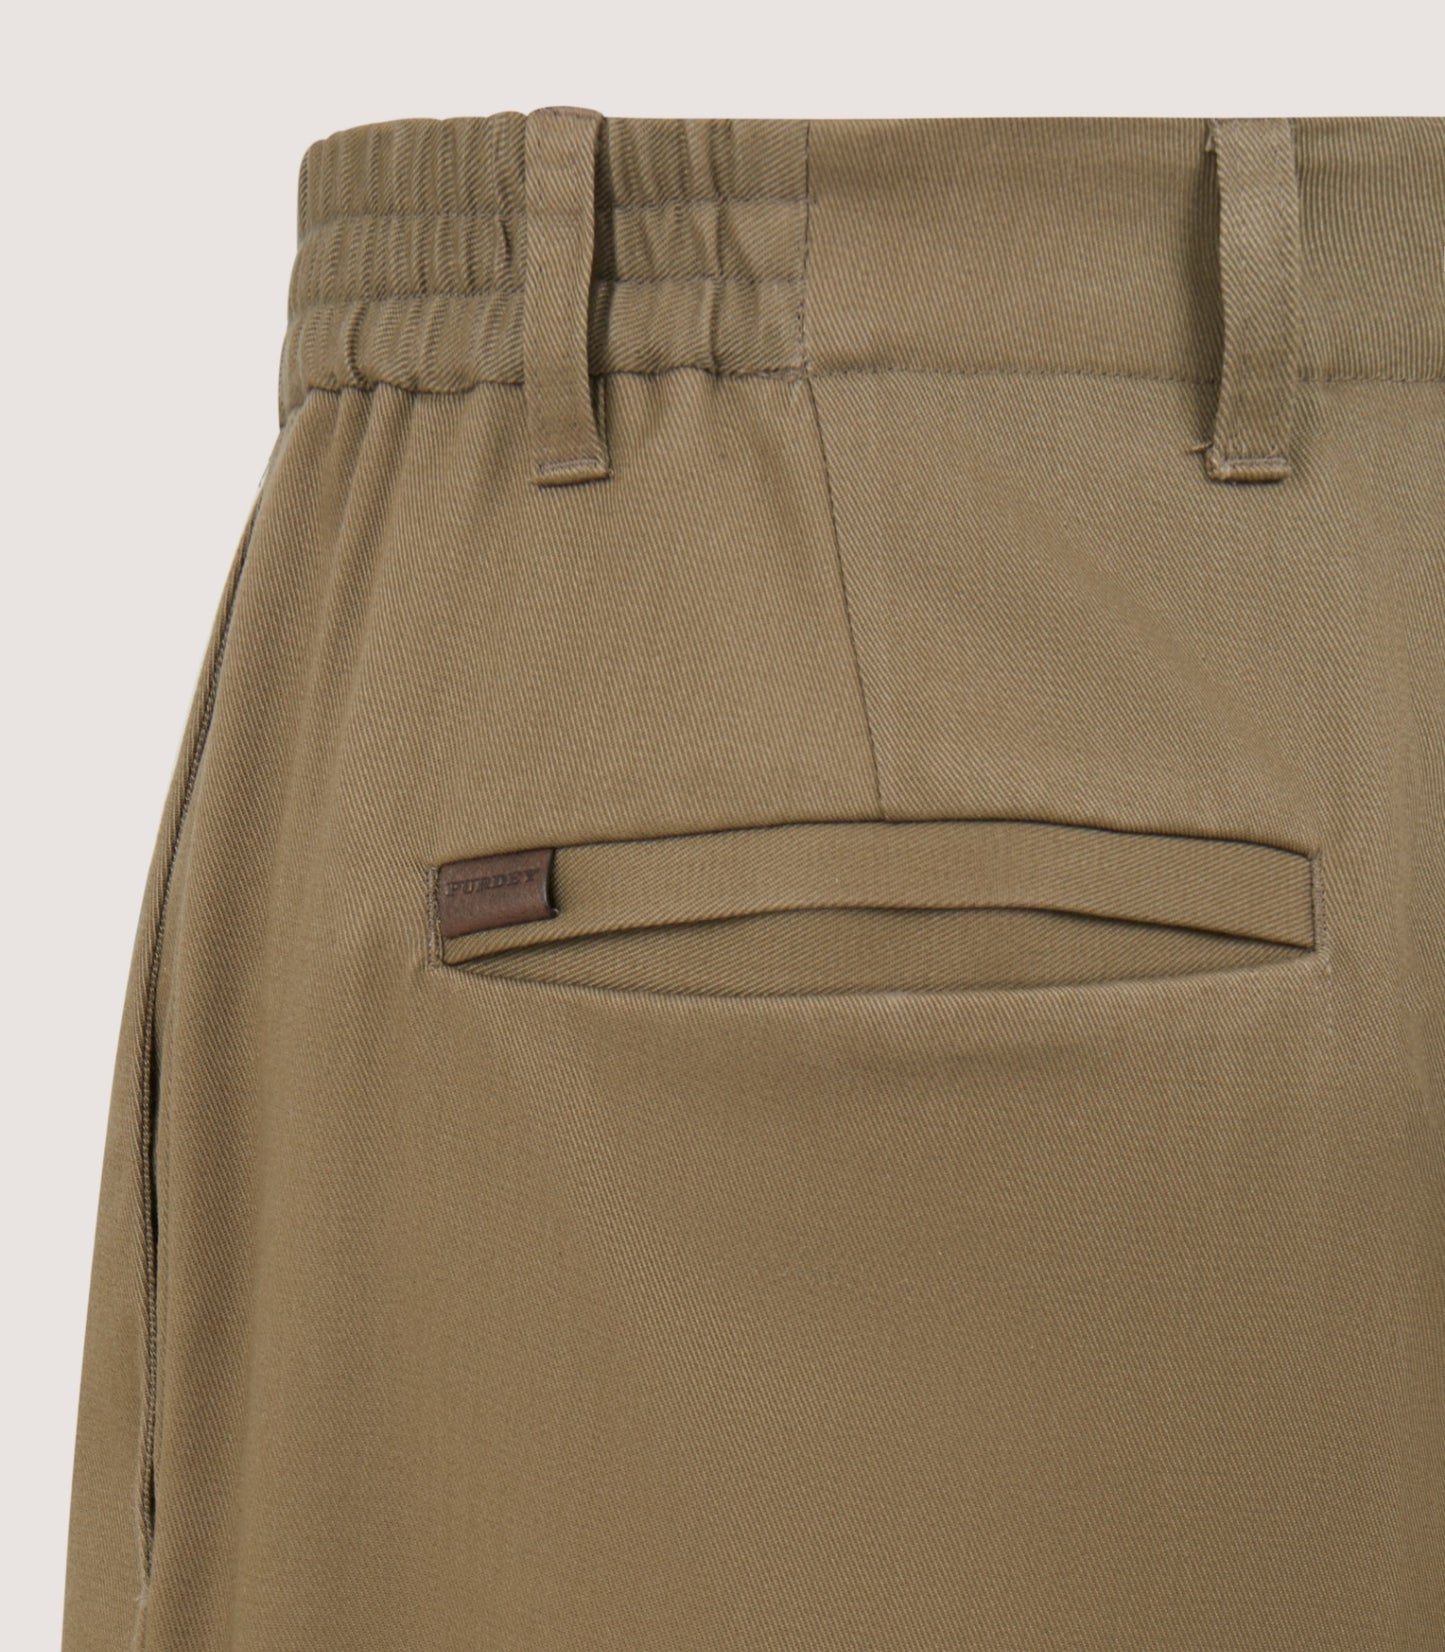 Men's Performance Twill Chino in Flax